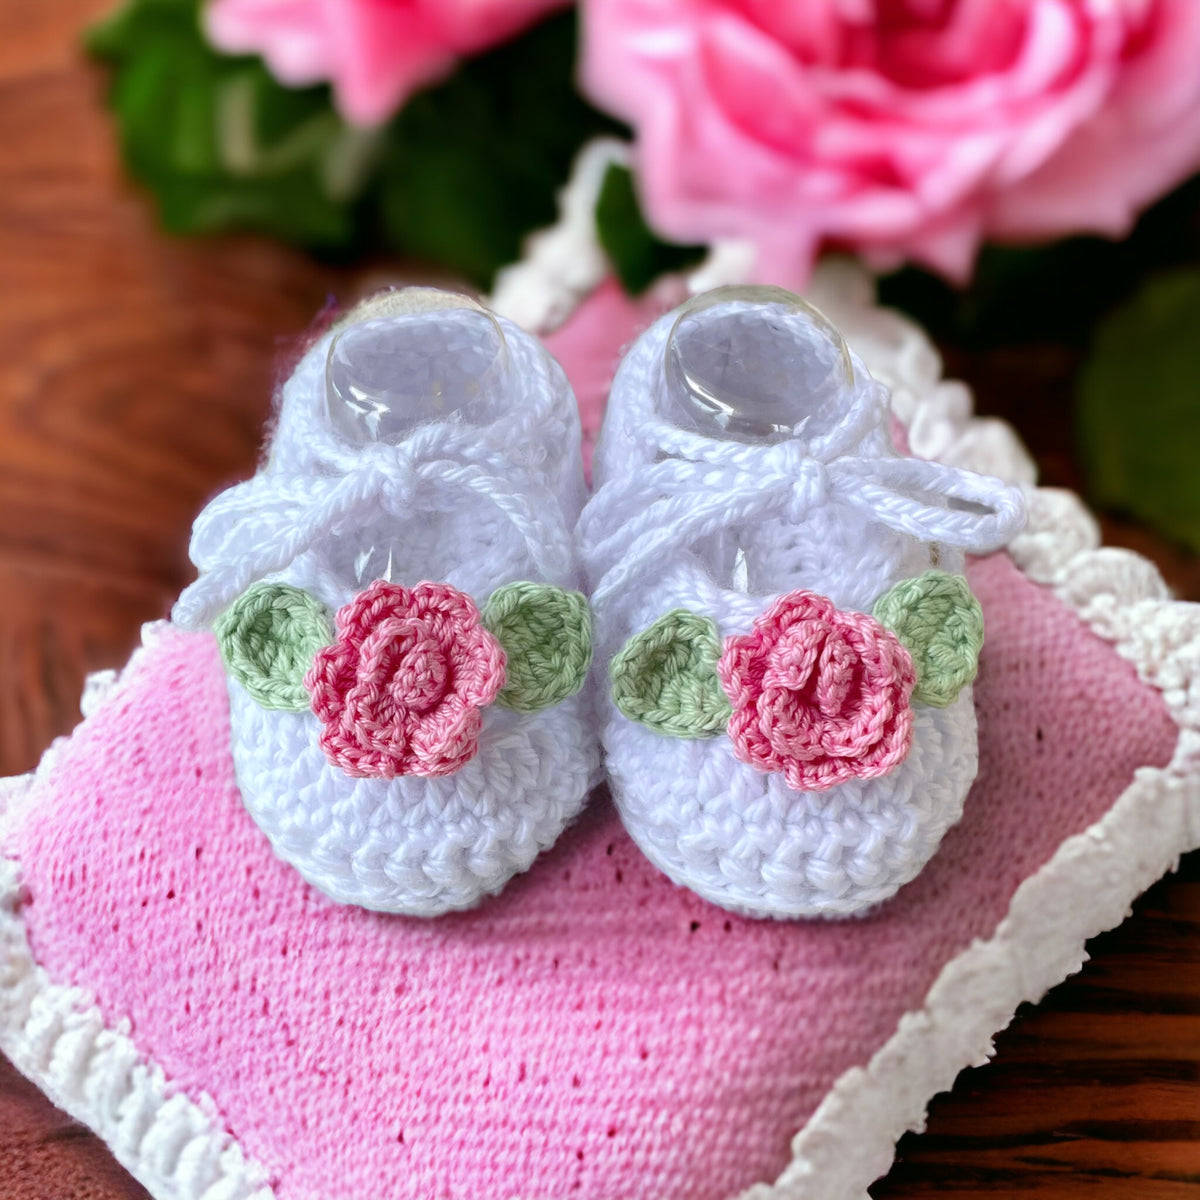 Crochet baby booties, Mary Jane rose shoes